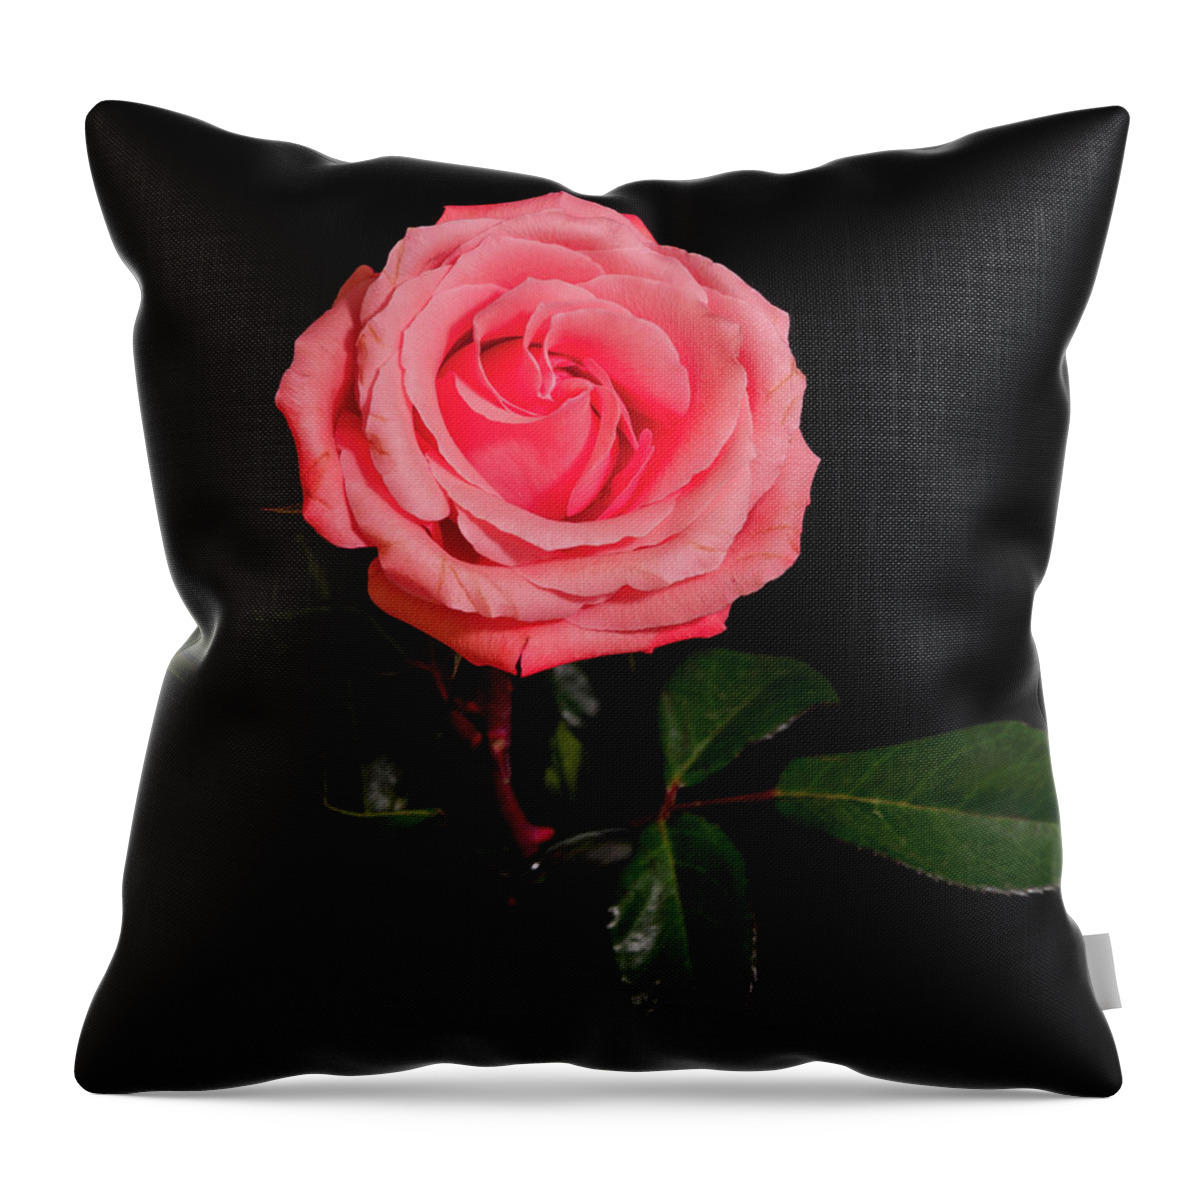 Rose Throw Pillow featuring the photograph Lovely Rose by John Roach